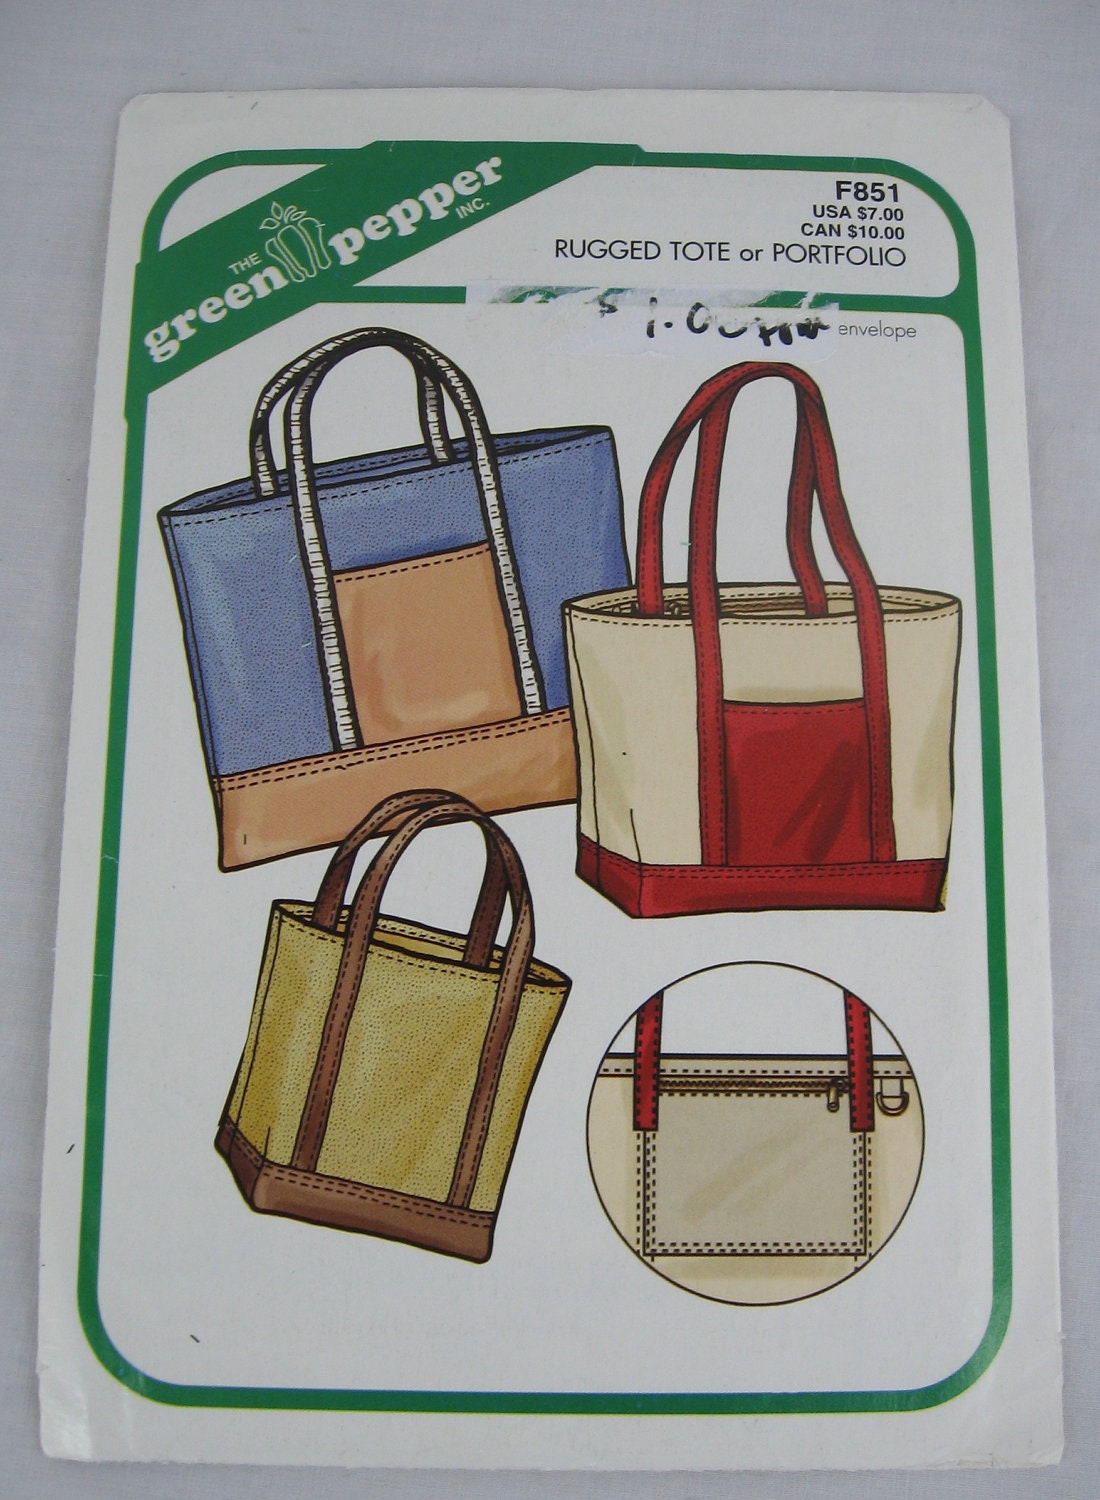 The Green Pepper Rugged Tote or Portfolio Pattern F851